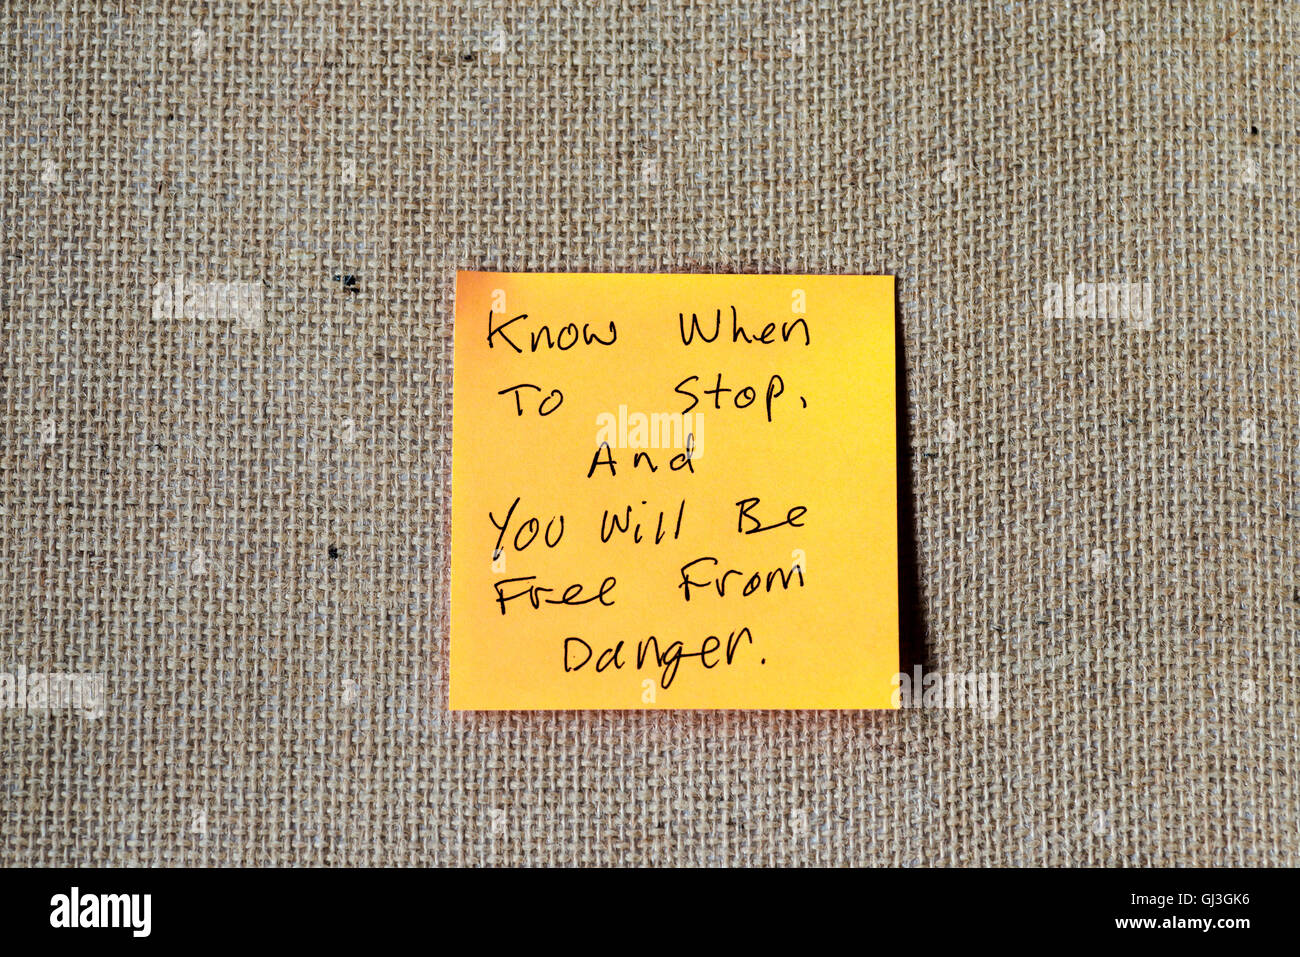 famous quote from the Tao Te Ching written on sticky notes, burlap background. Stock Photo